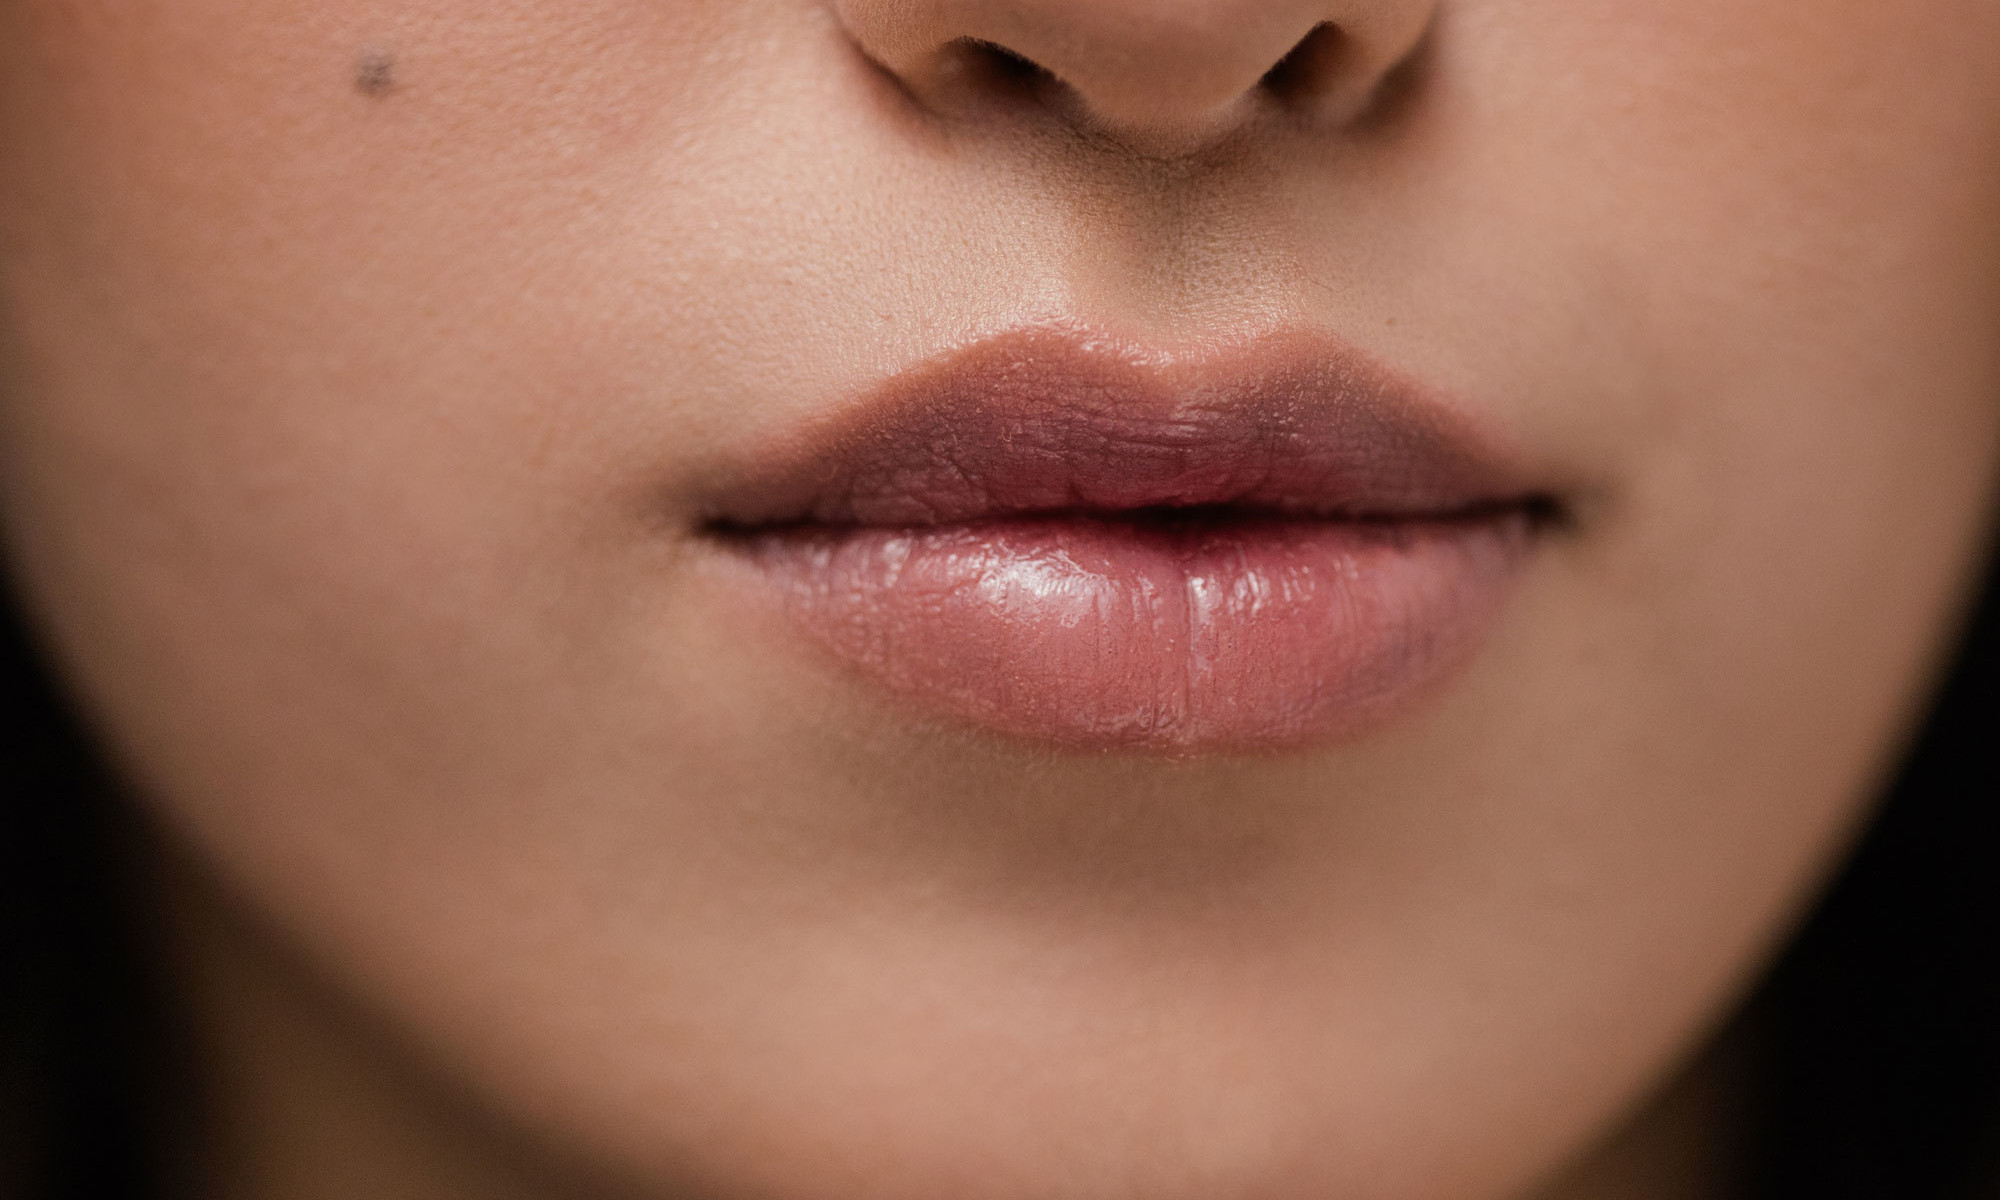 Gasp: Lips Deflate With Age — Here's What To Do About It